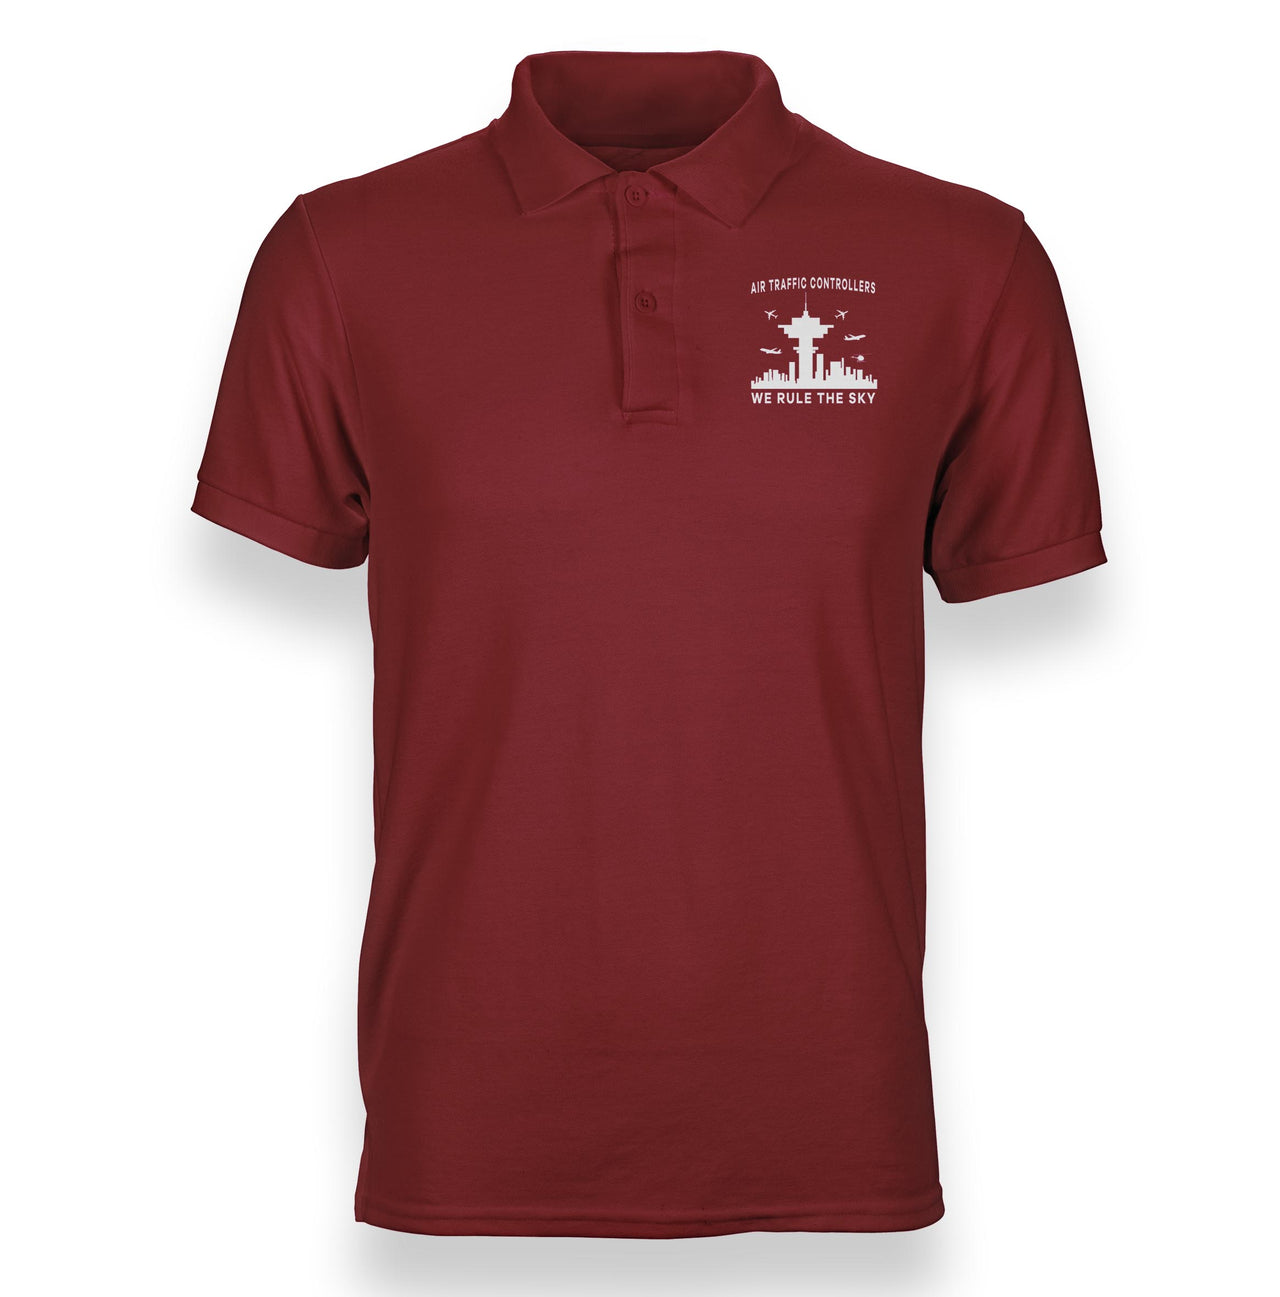 Air Traffic Controllers - We Rule The Sky Designed Polo T-Shirts